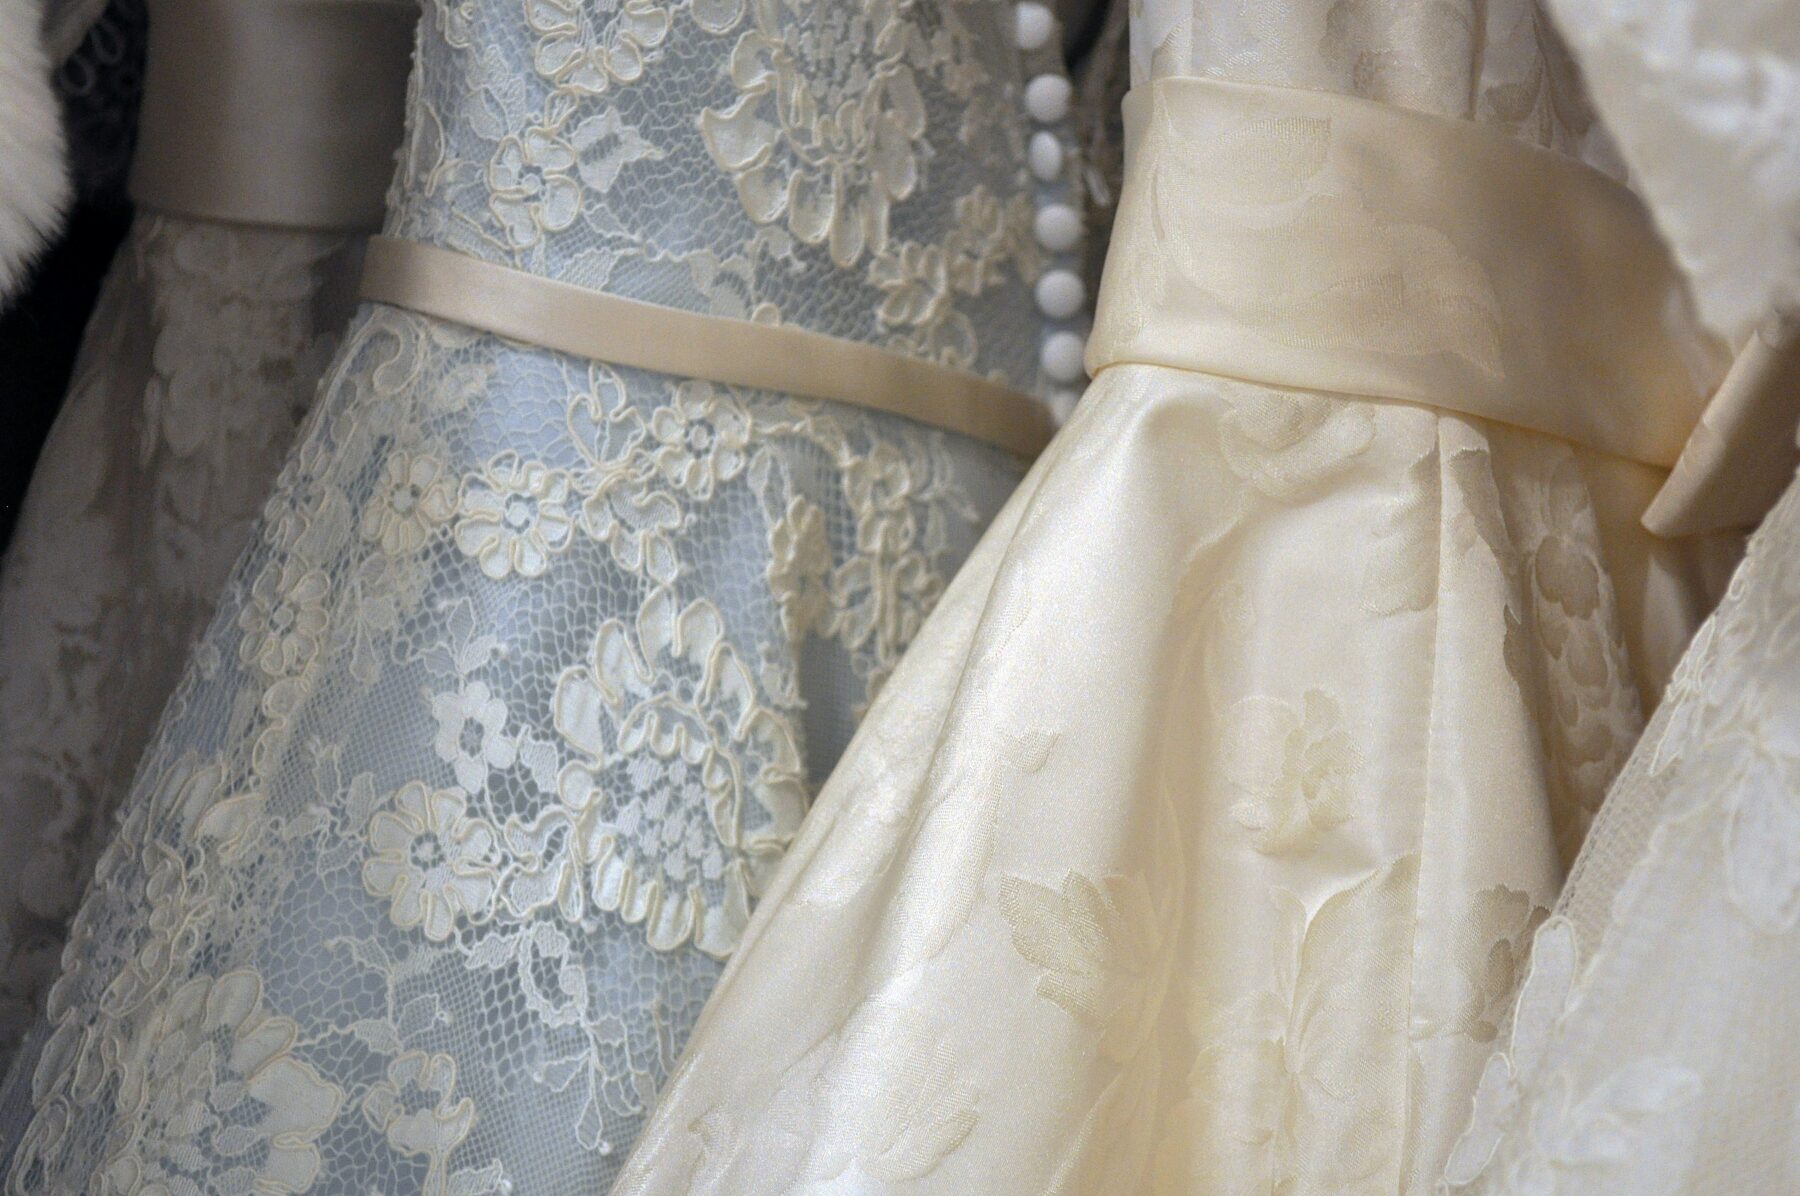 10 Secrets To Nabbing Gorgeous Wedding Gowns At Good Prices